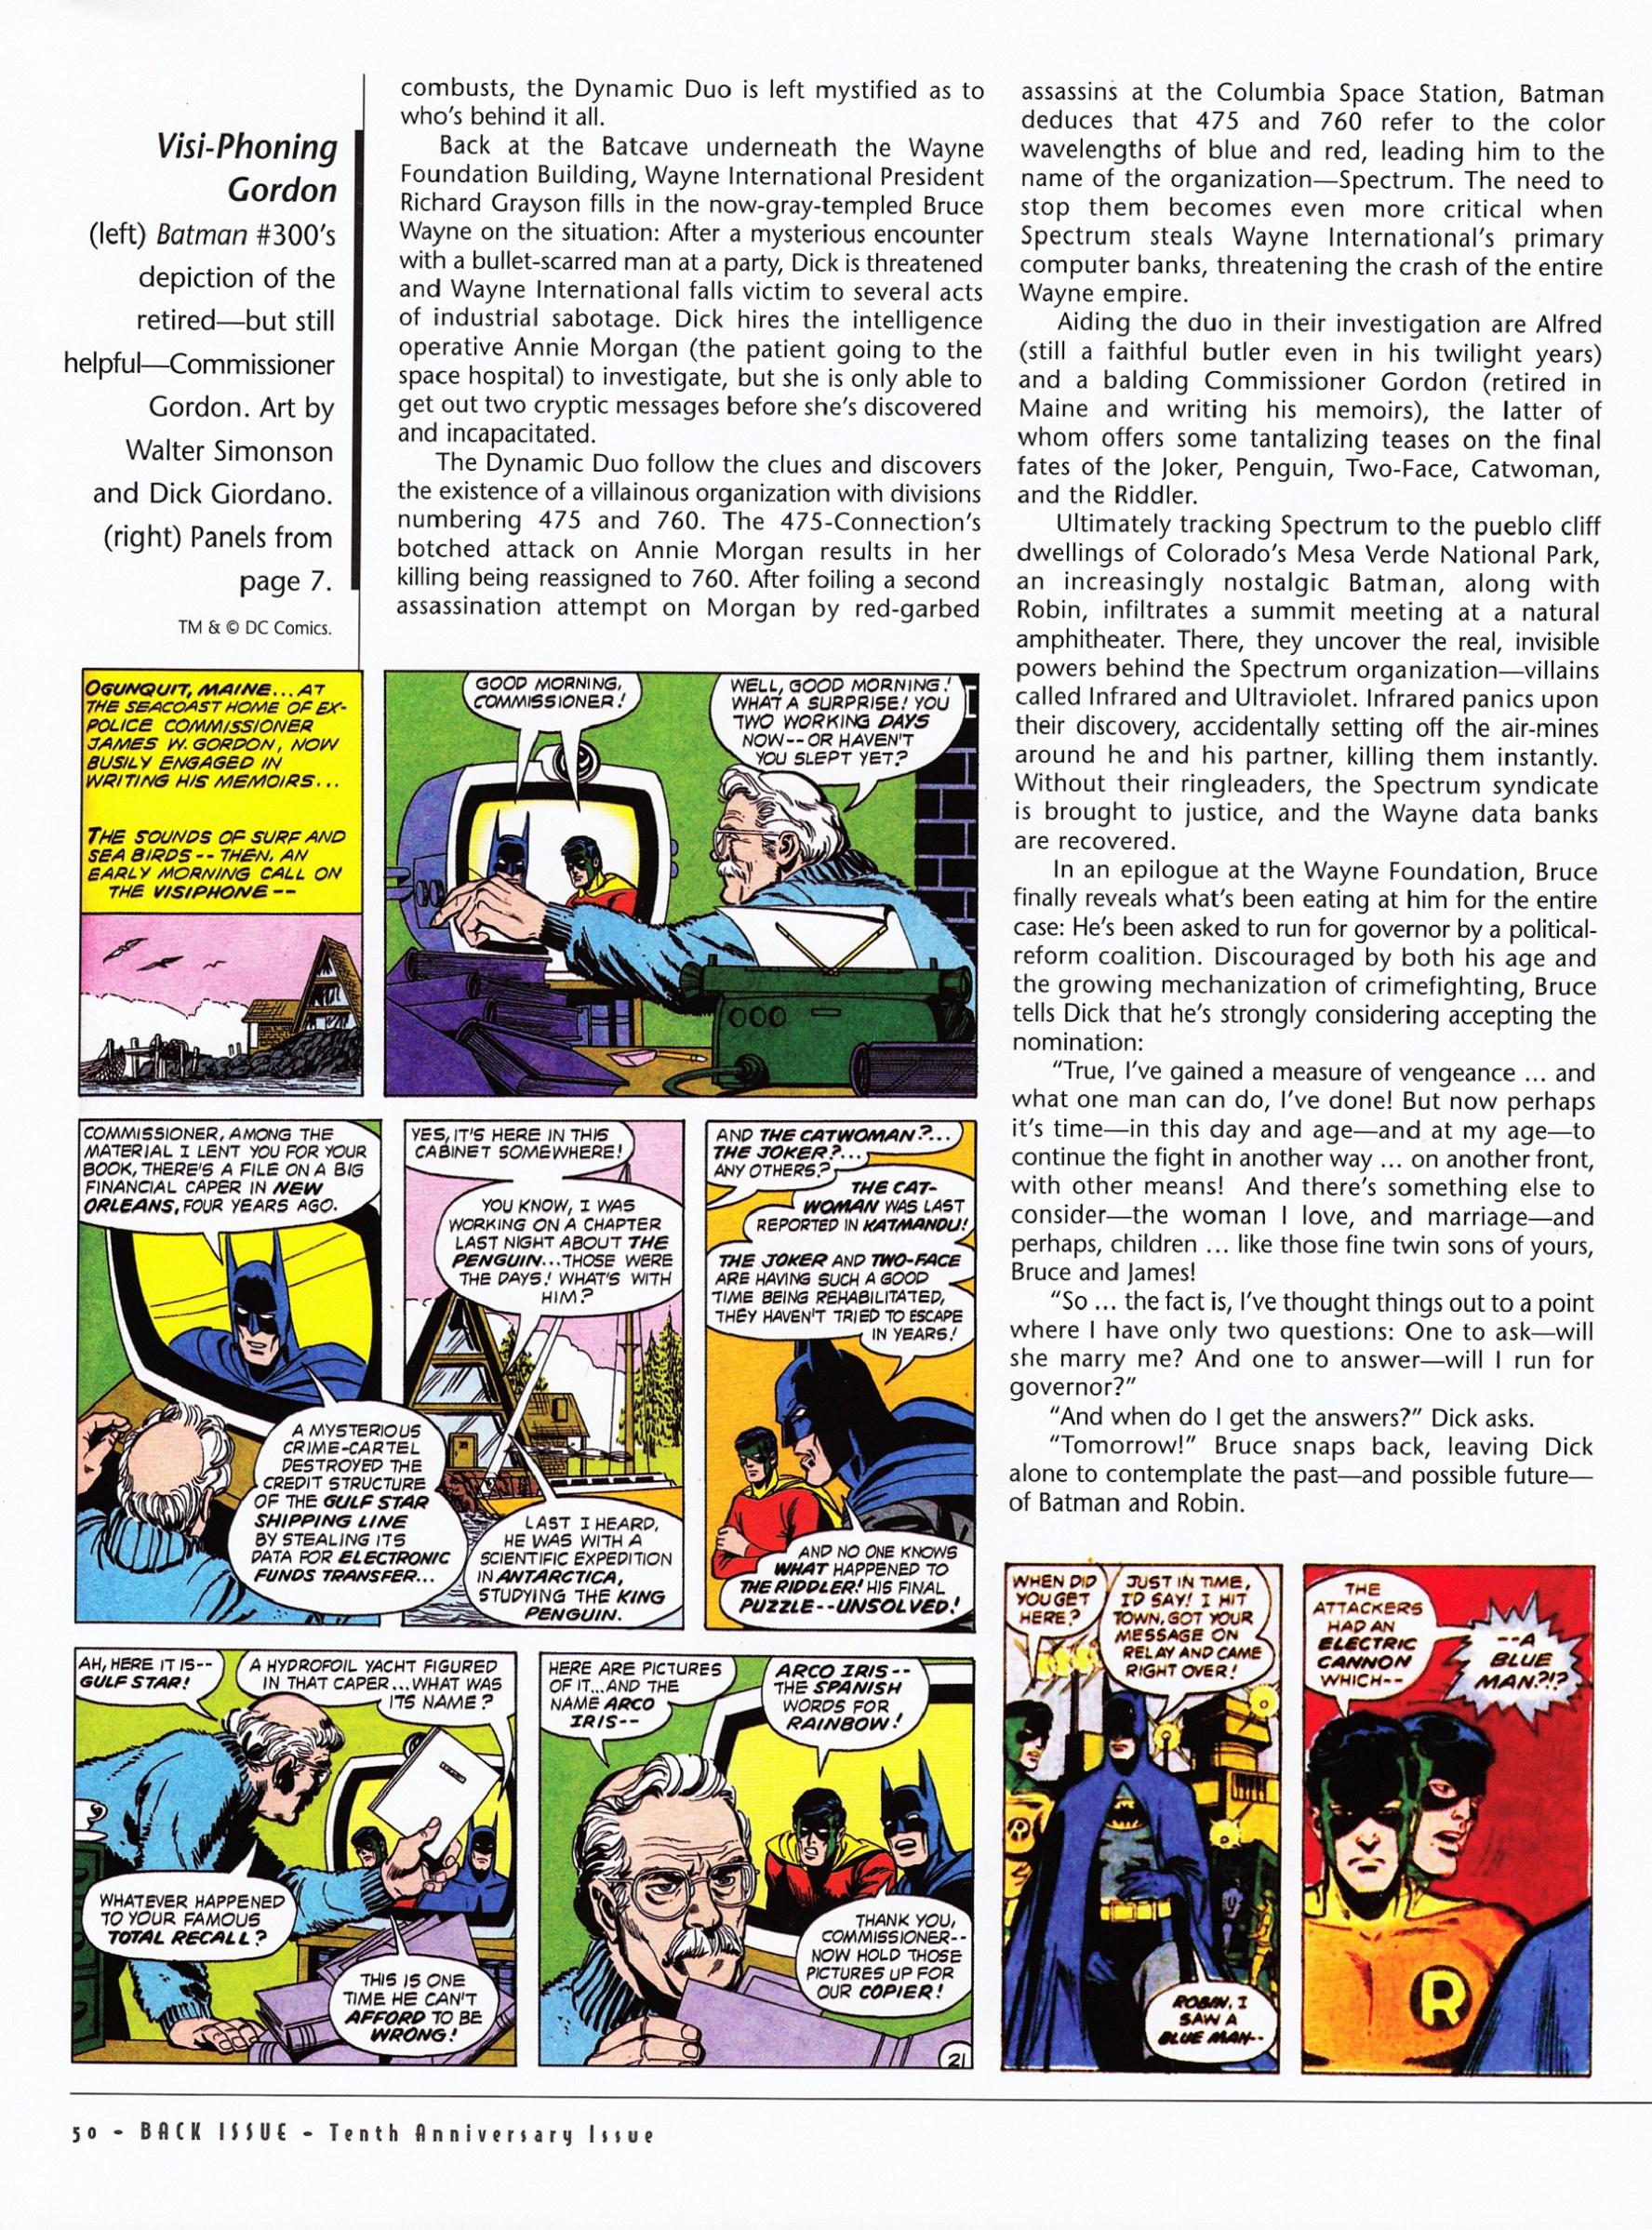 Read online Back Issue comic -  Issue #69 - 51